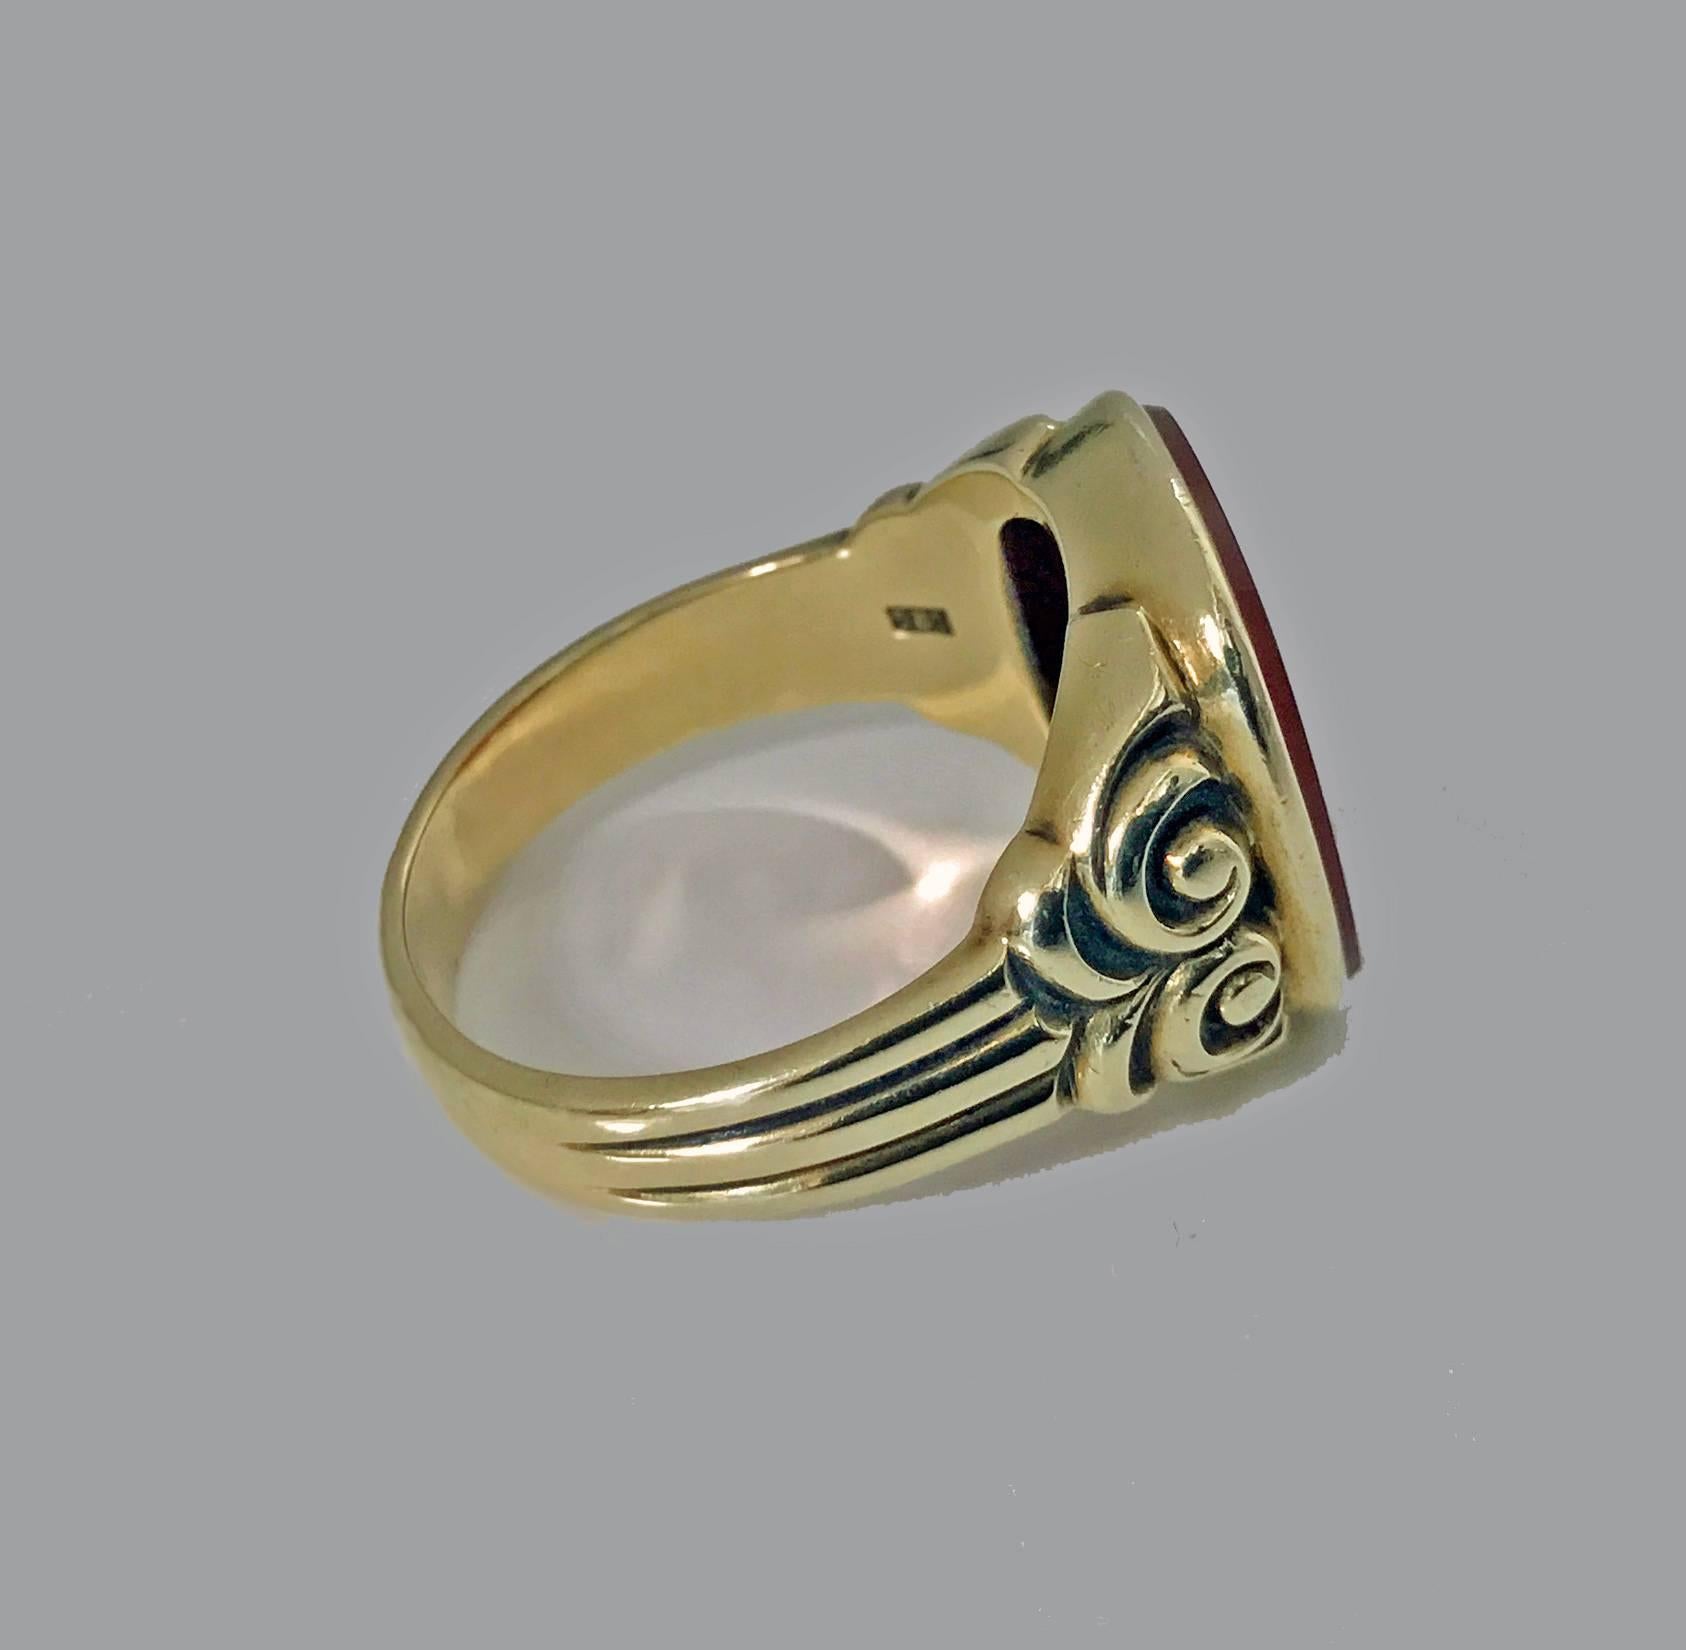 Antique gold carnelian ring, circa 1890. Nice large size, unengraved lively orange carnelian, Measures: approximately 16 x 14 mm, carved and ribbed shoulders, plain shank. Stamped 585. Ring size: 10.25. May be sized. Item weight: 8.10 grams.